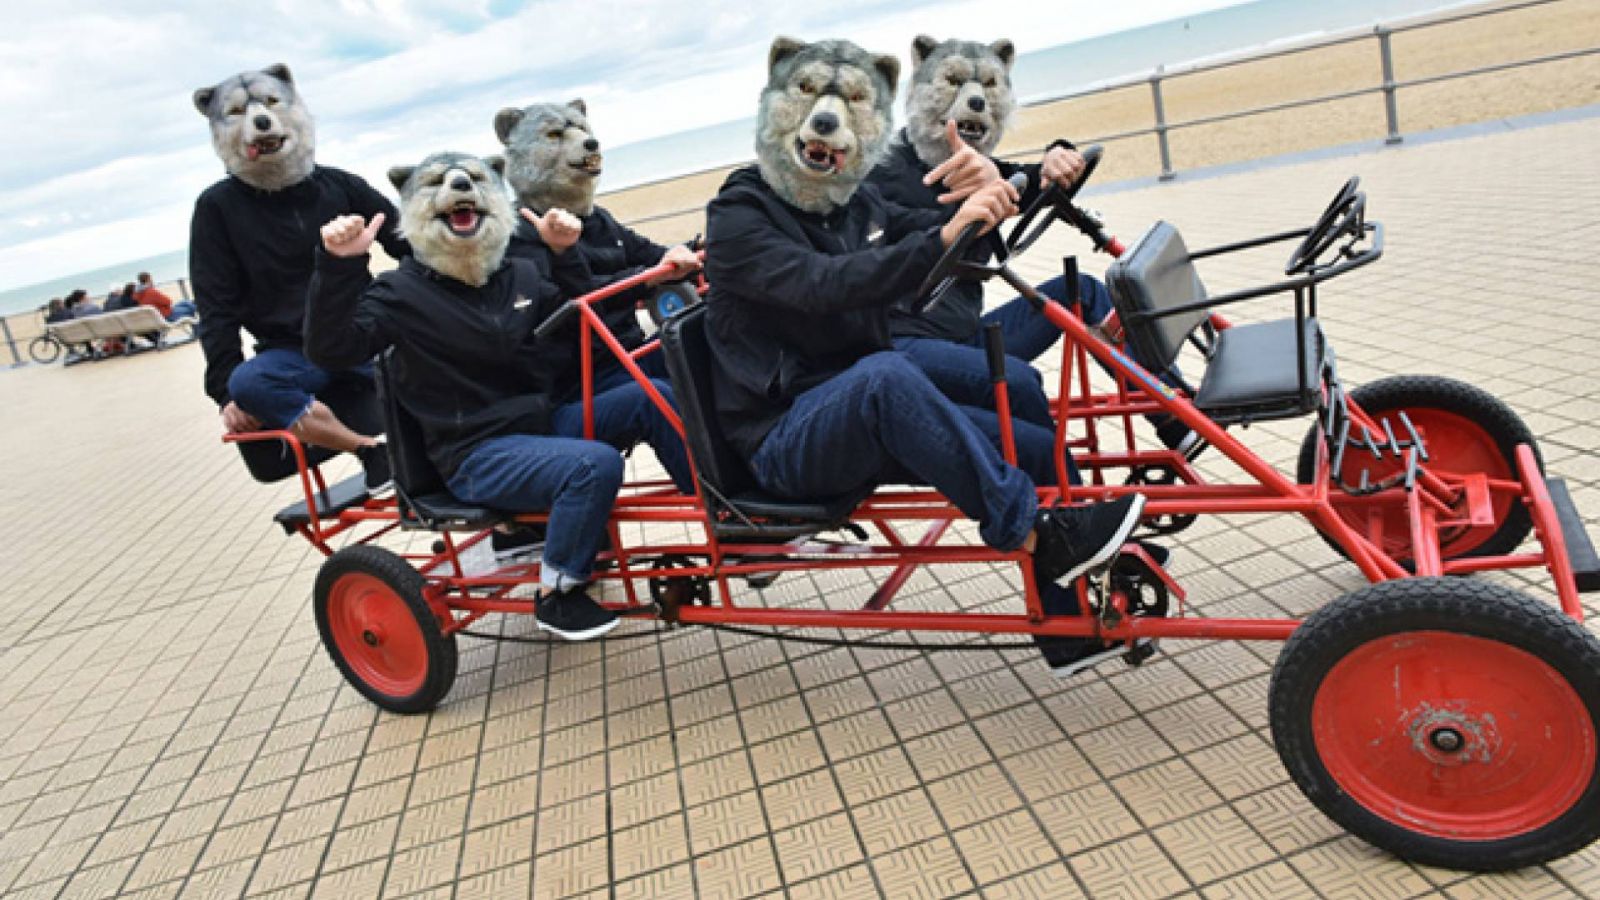 MAN WITH A MISSION lanzará nuevo single digital © Sony Music Entertainment (Japan) Inc. All rights reserved.